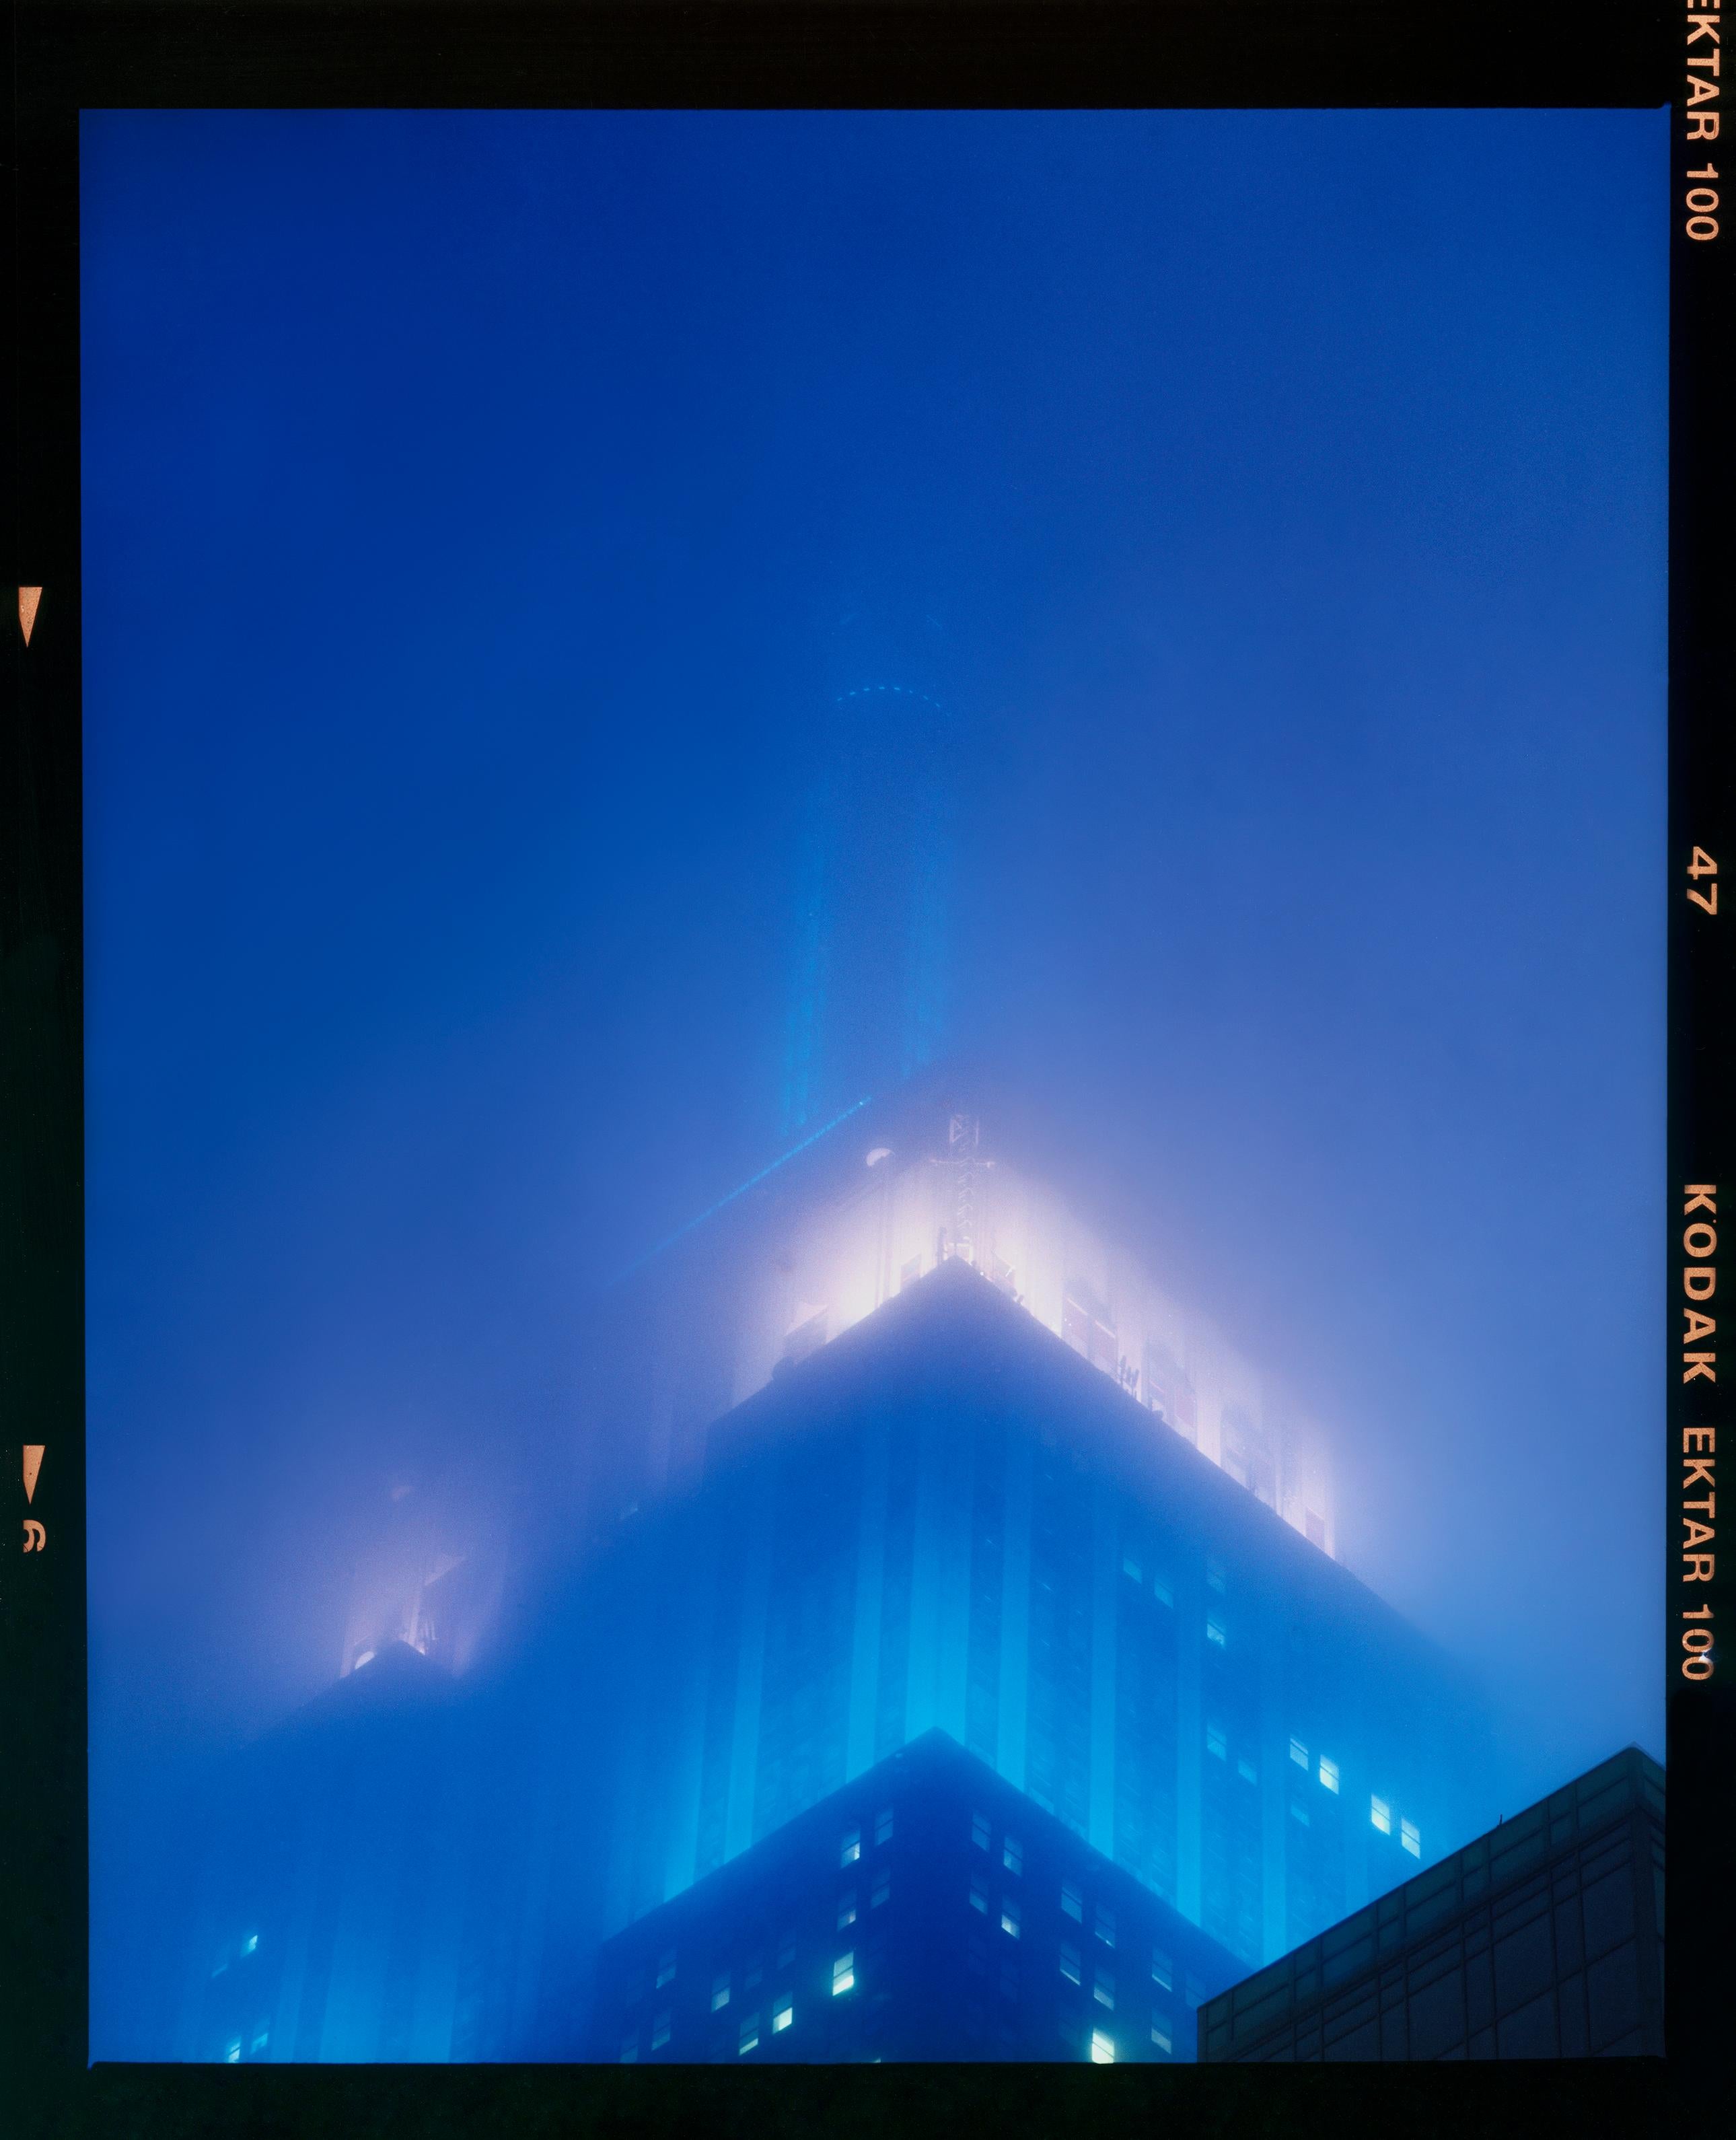 NOMAD II (Film Rebate), New York - Conceptual Architectural Color Photography